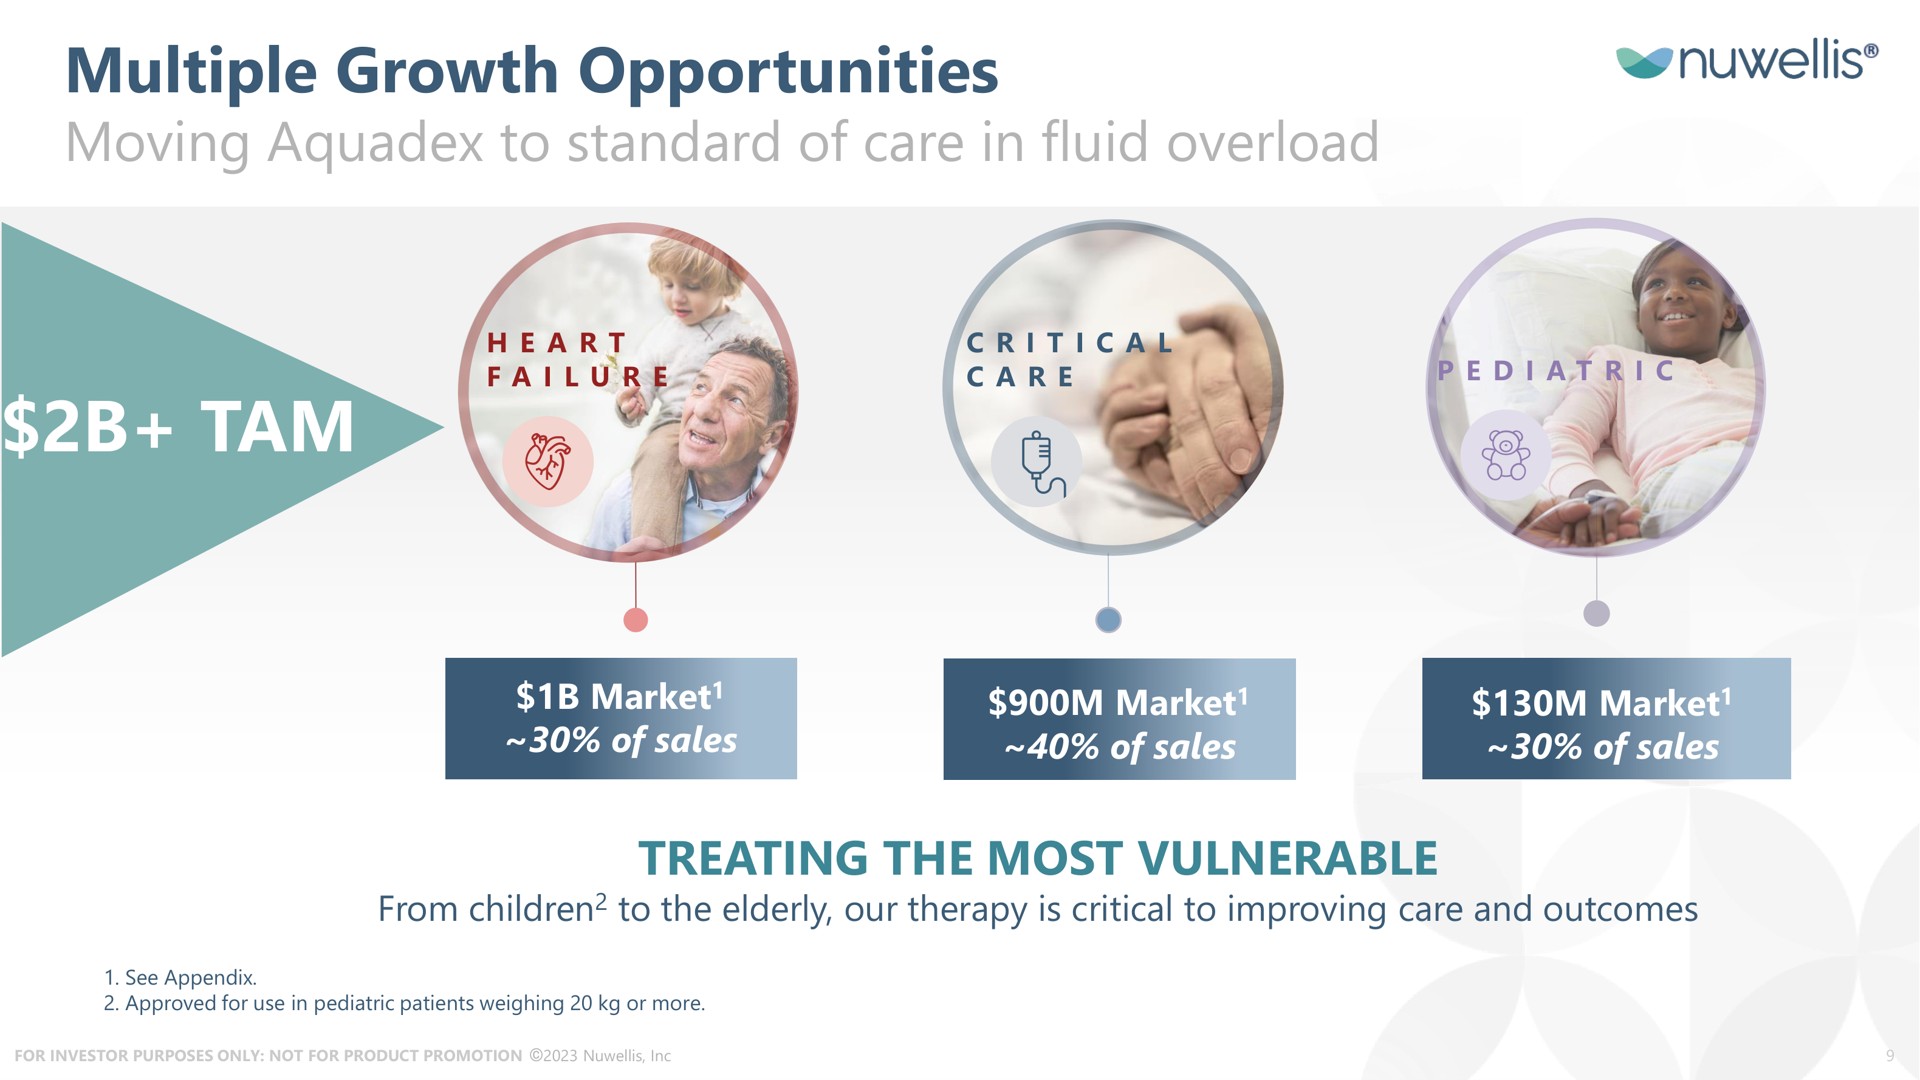 multiple growth opportunities moving to standard of care in fluid overload tam treating the most vulnerable | Nuwellis